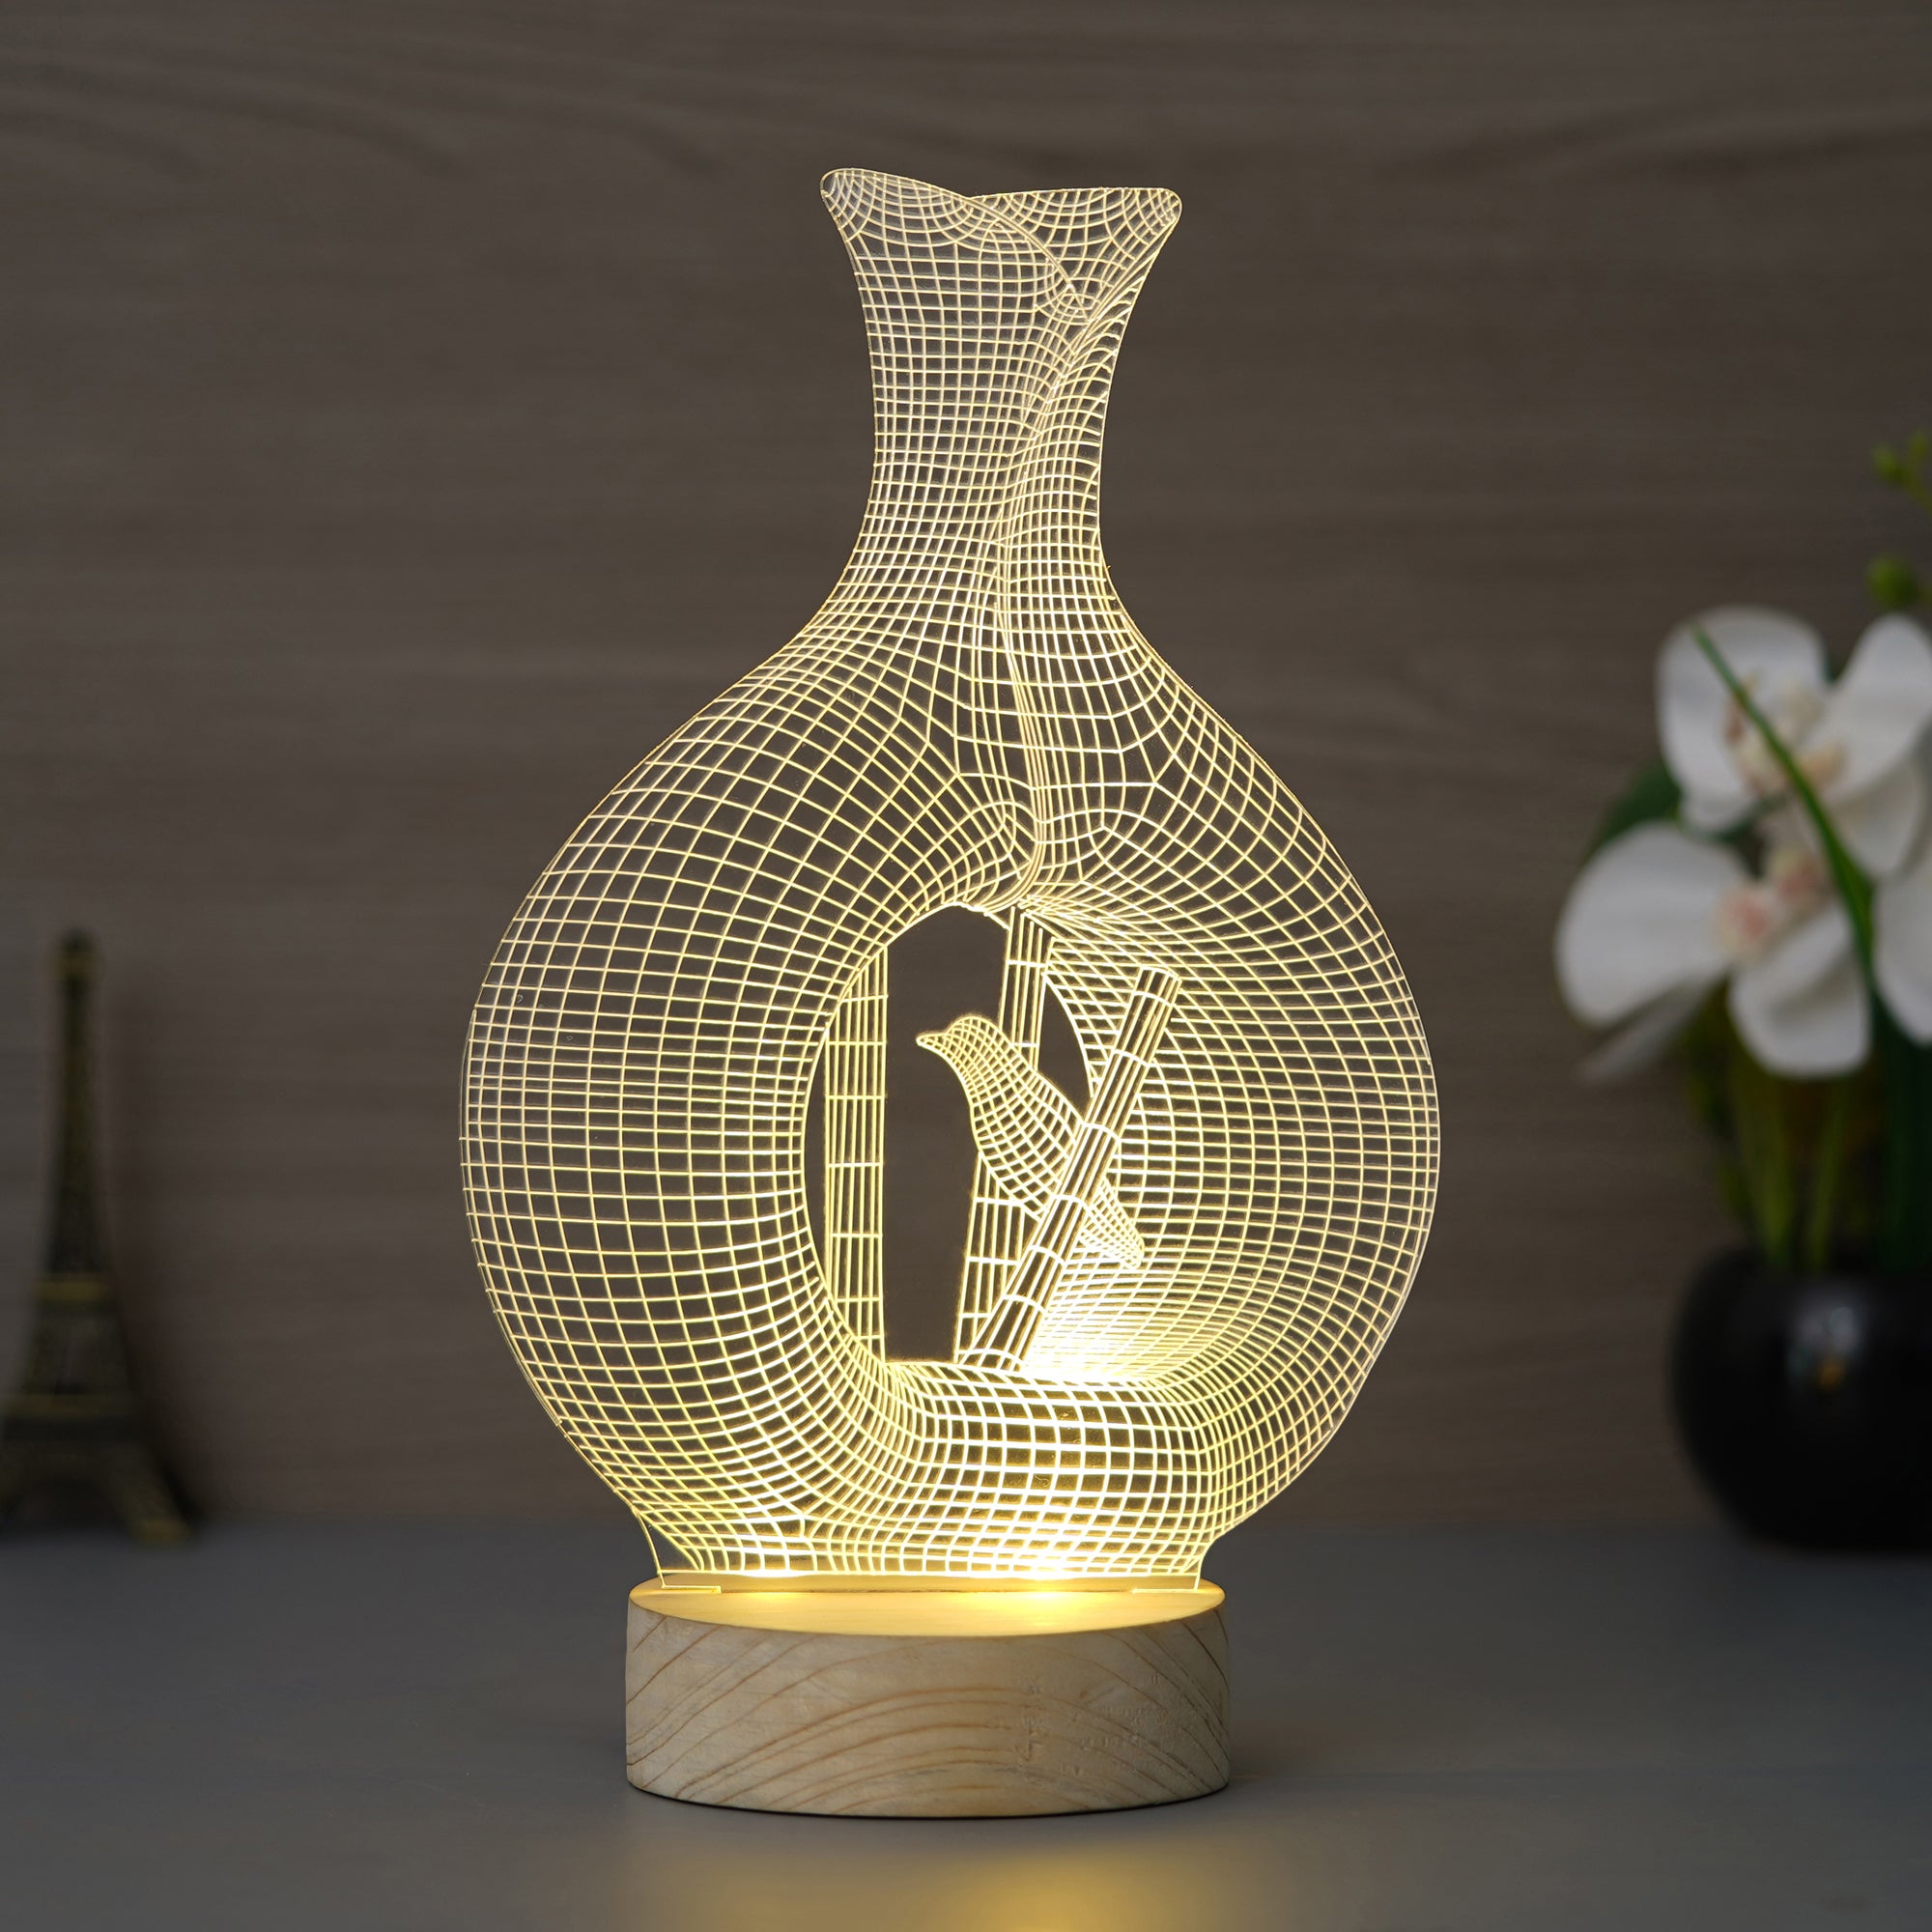 Pot with Bird Design Carved on Acrylic & Wood Base Night Lamp